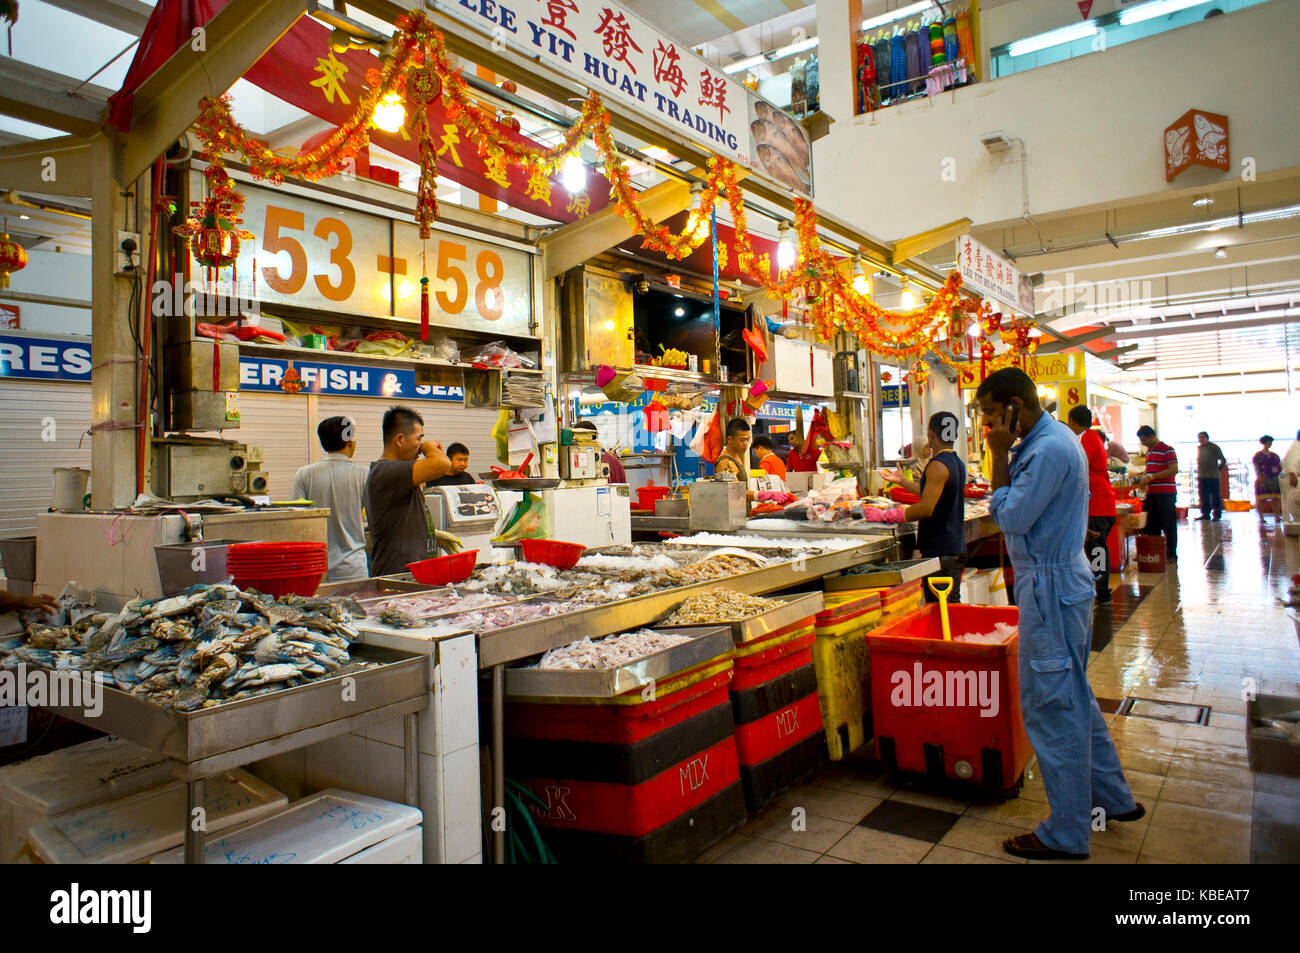 Interior of a food market in Little India, centre of the city's large Indian community and one of its most vibrant districts. Singapore Stock Photo